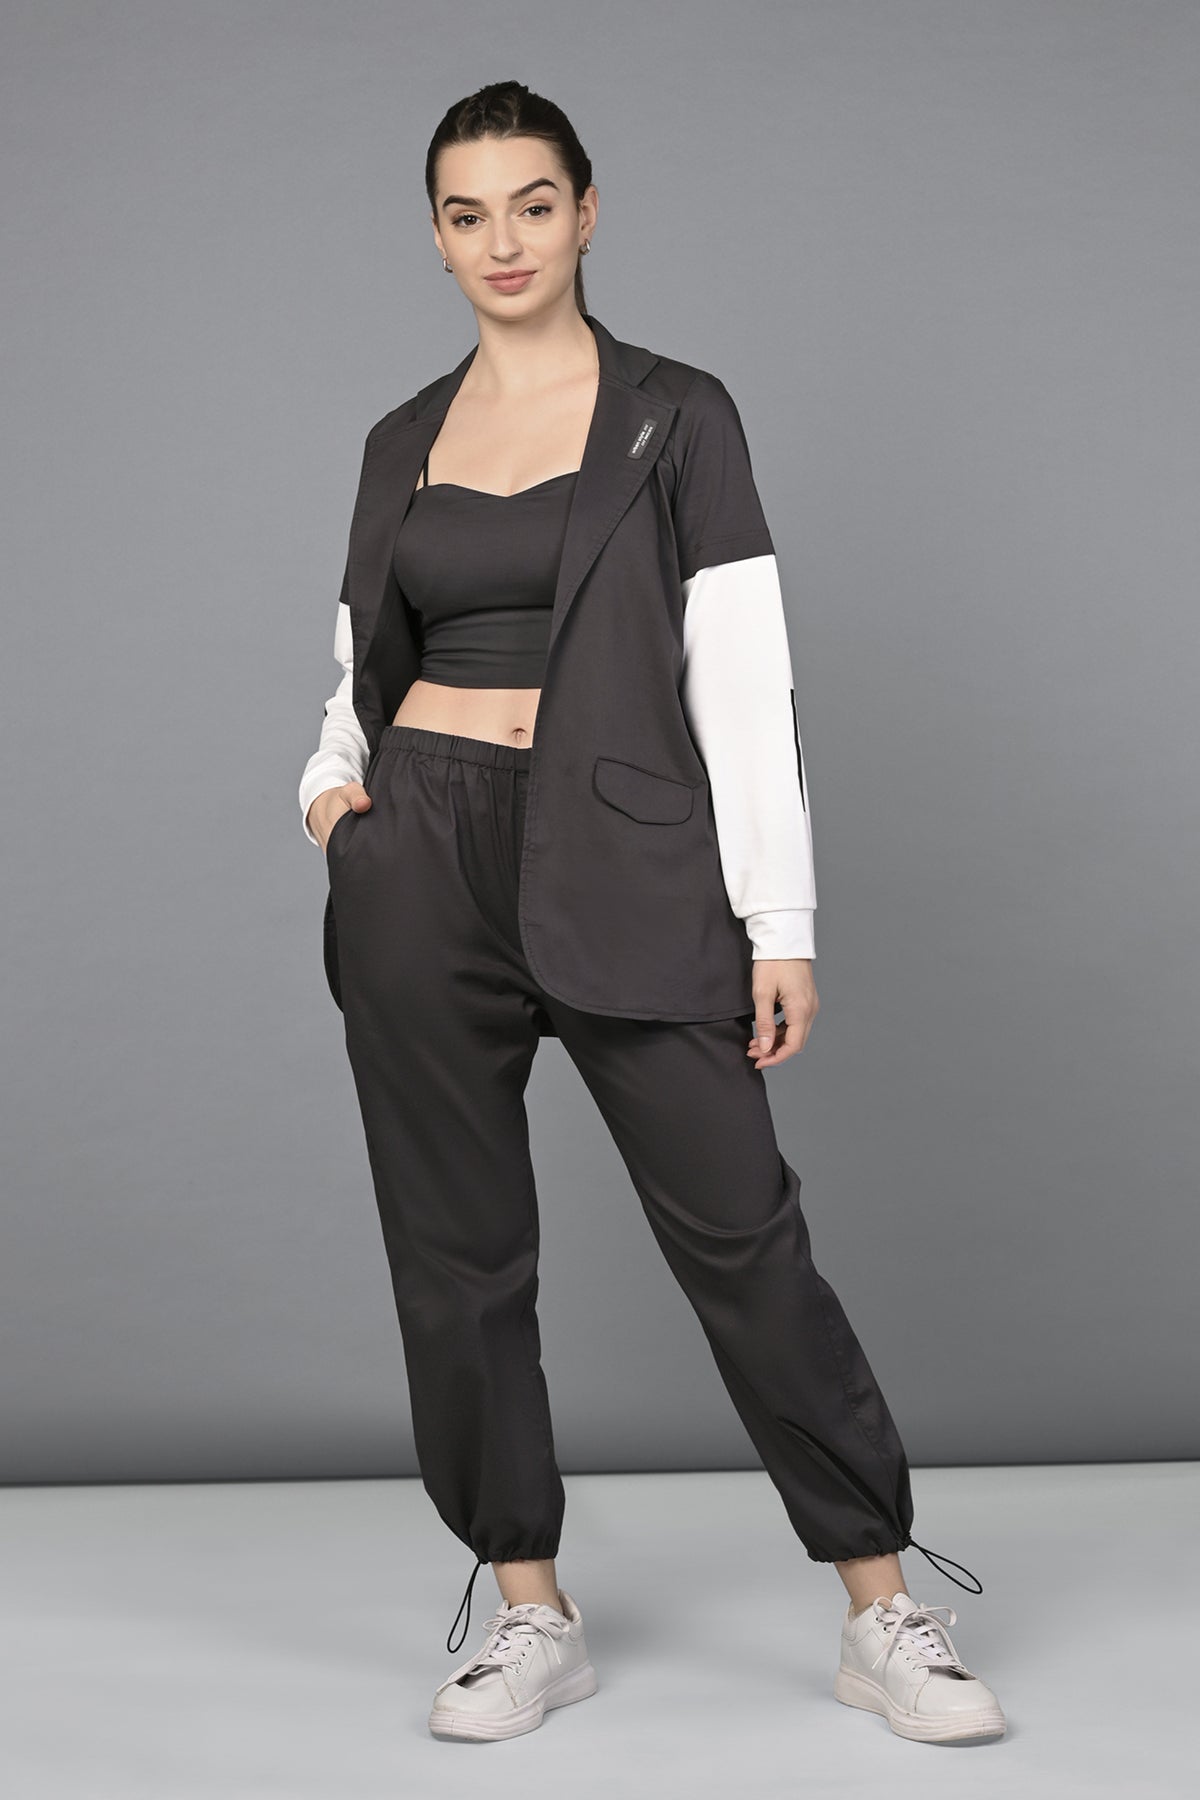 Athleisure Blazer Tracks with bustiere Co-ord set